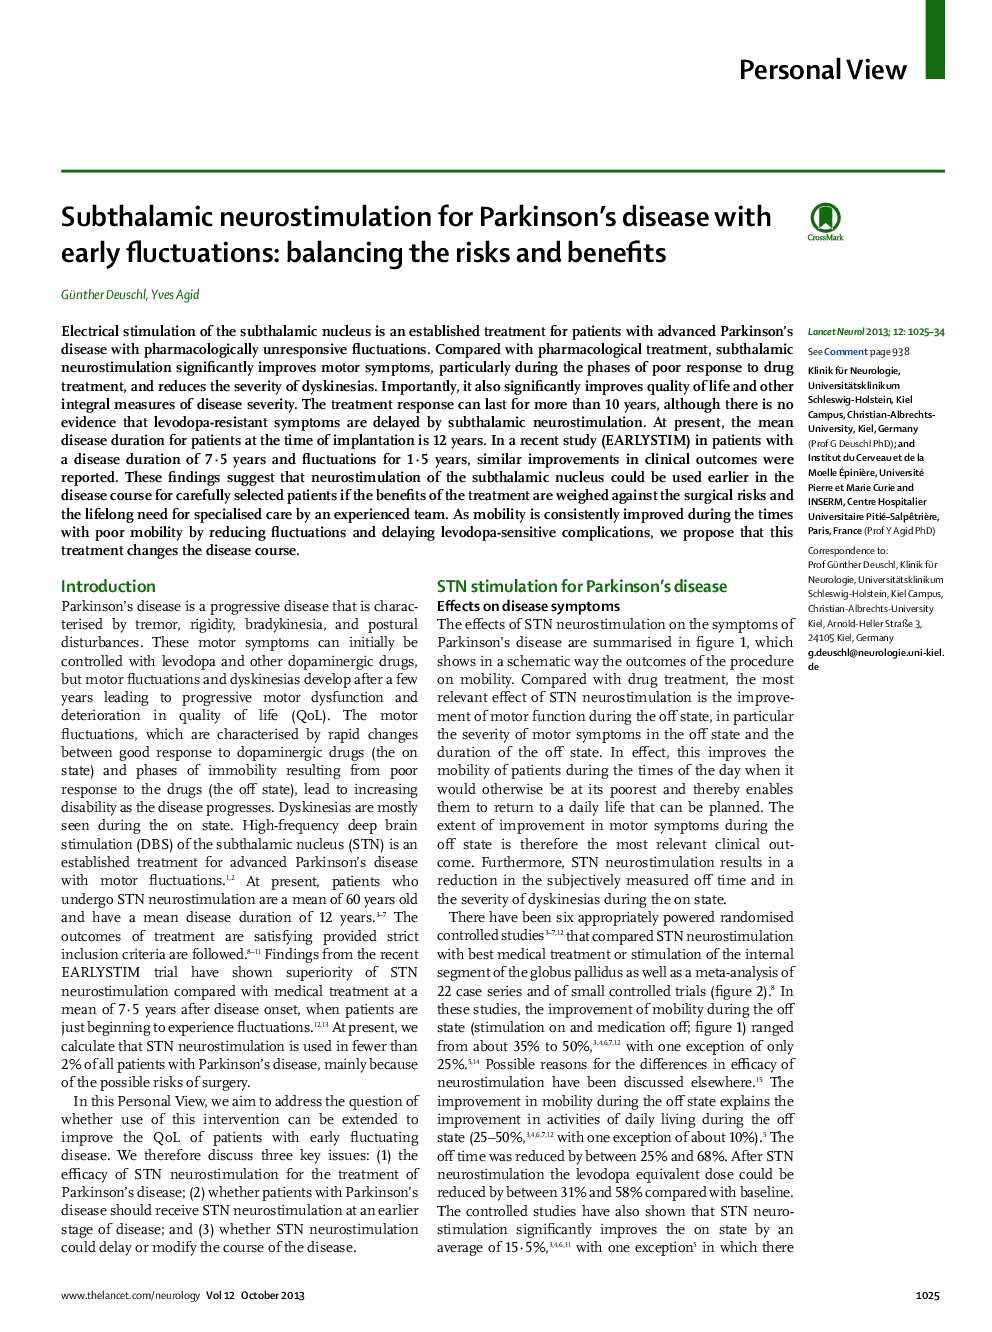 Subthalamic neurostimulation for Parkinson's disease with early fluctuations: balancing the risks and benefits